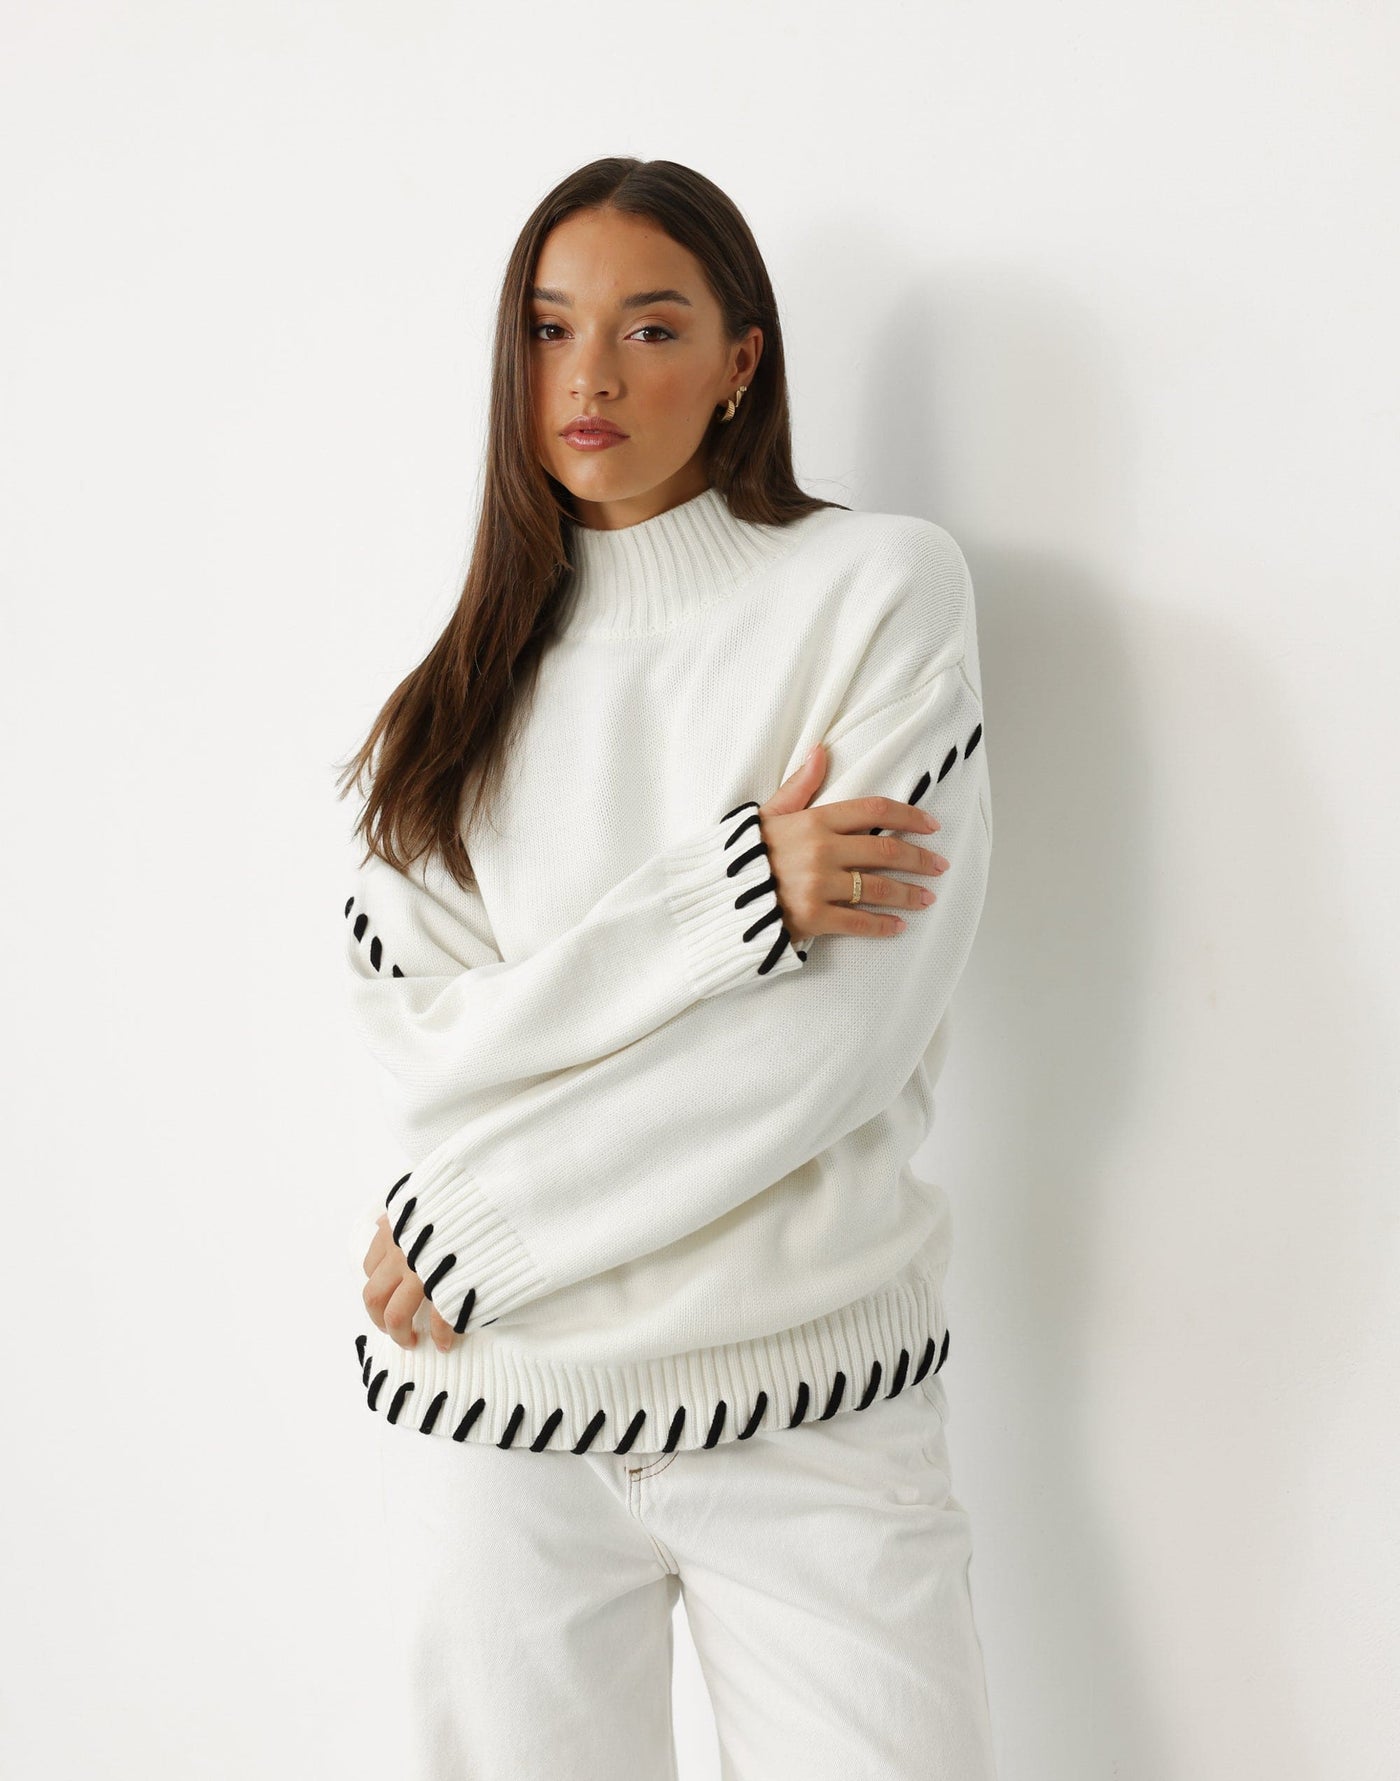 Tifanni Jumper (White) - Turtleneck Relaxed Fit Whip Stitch Detail Jumper - Women's Top - Charcoal Clothing